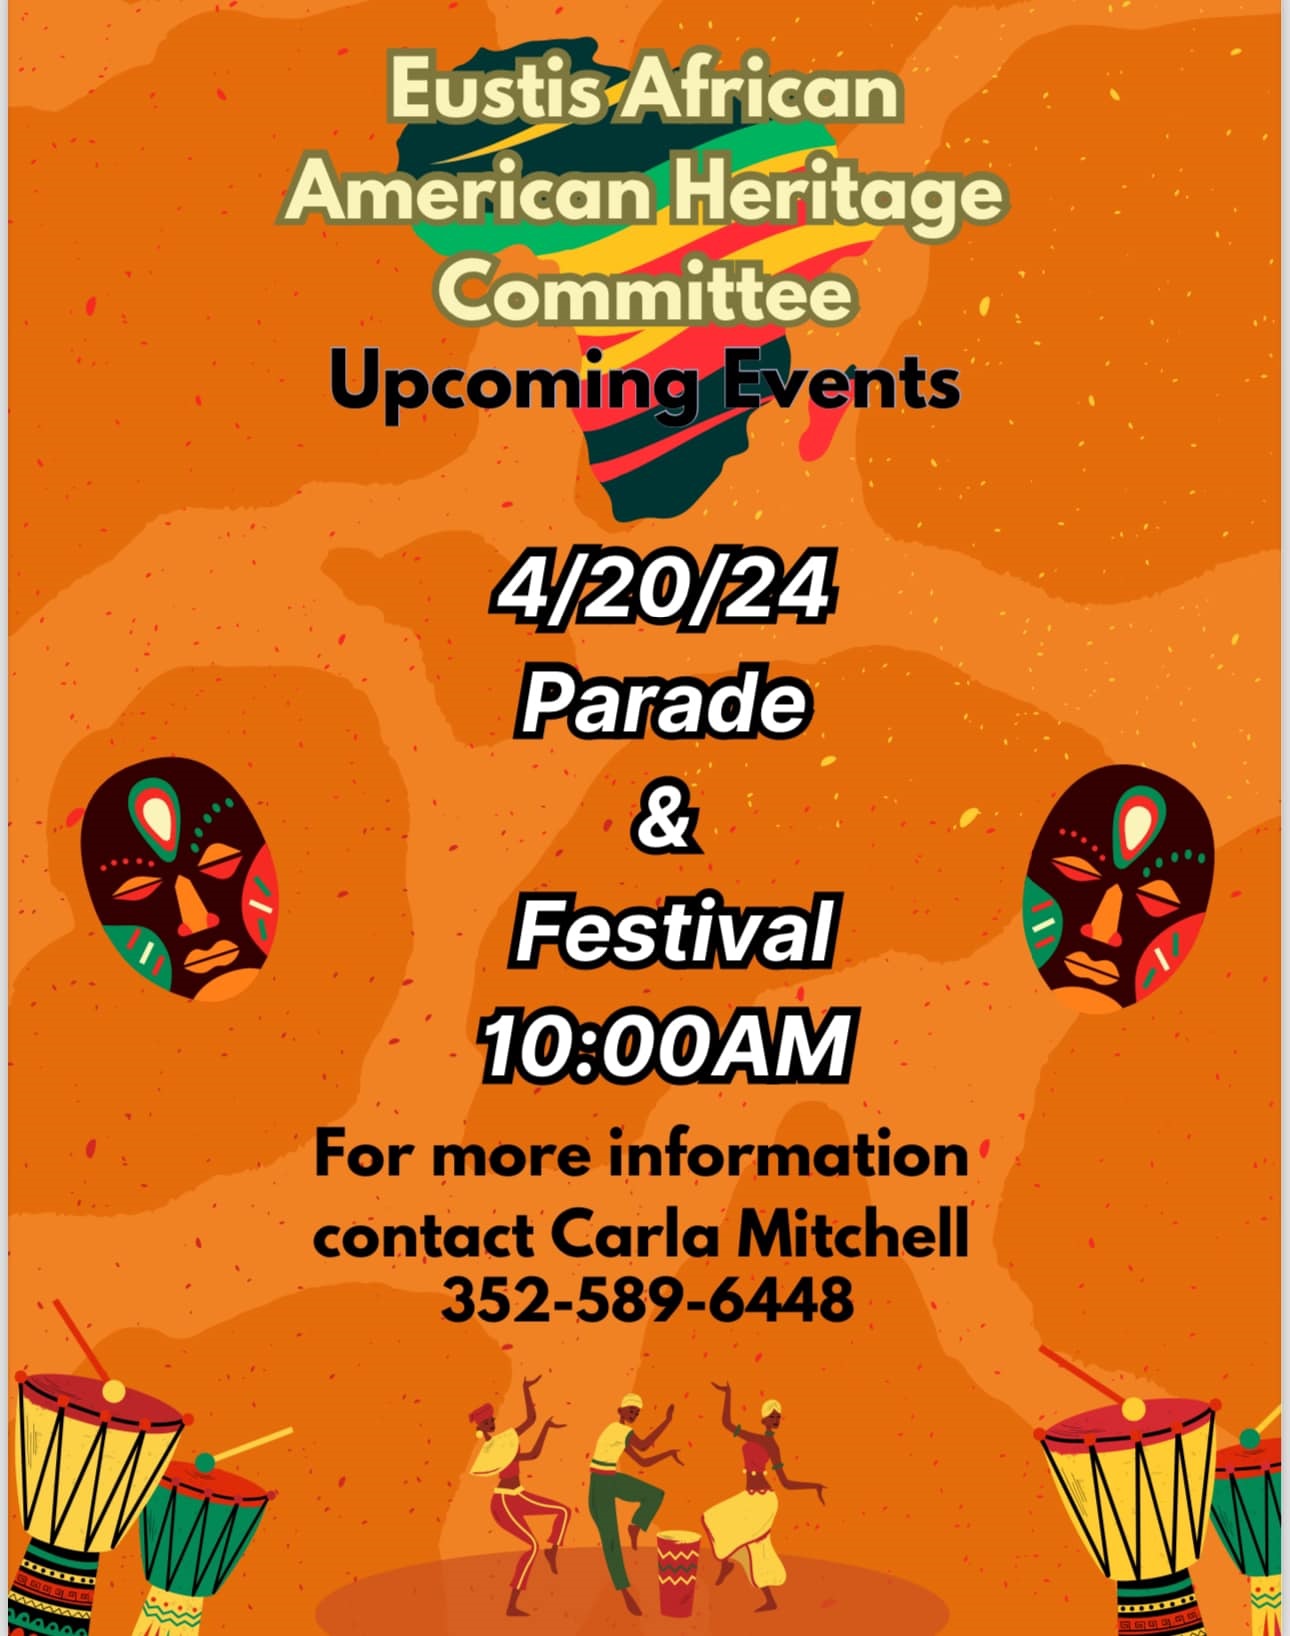 The African American Heritage Festival and Parade will be on April 20th, beginning at 10:00 A.M.